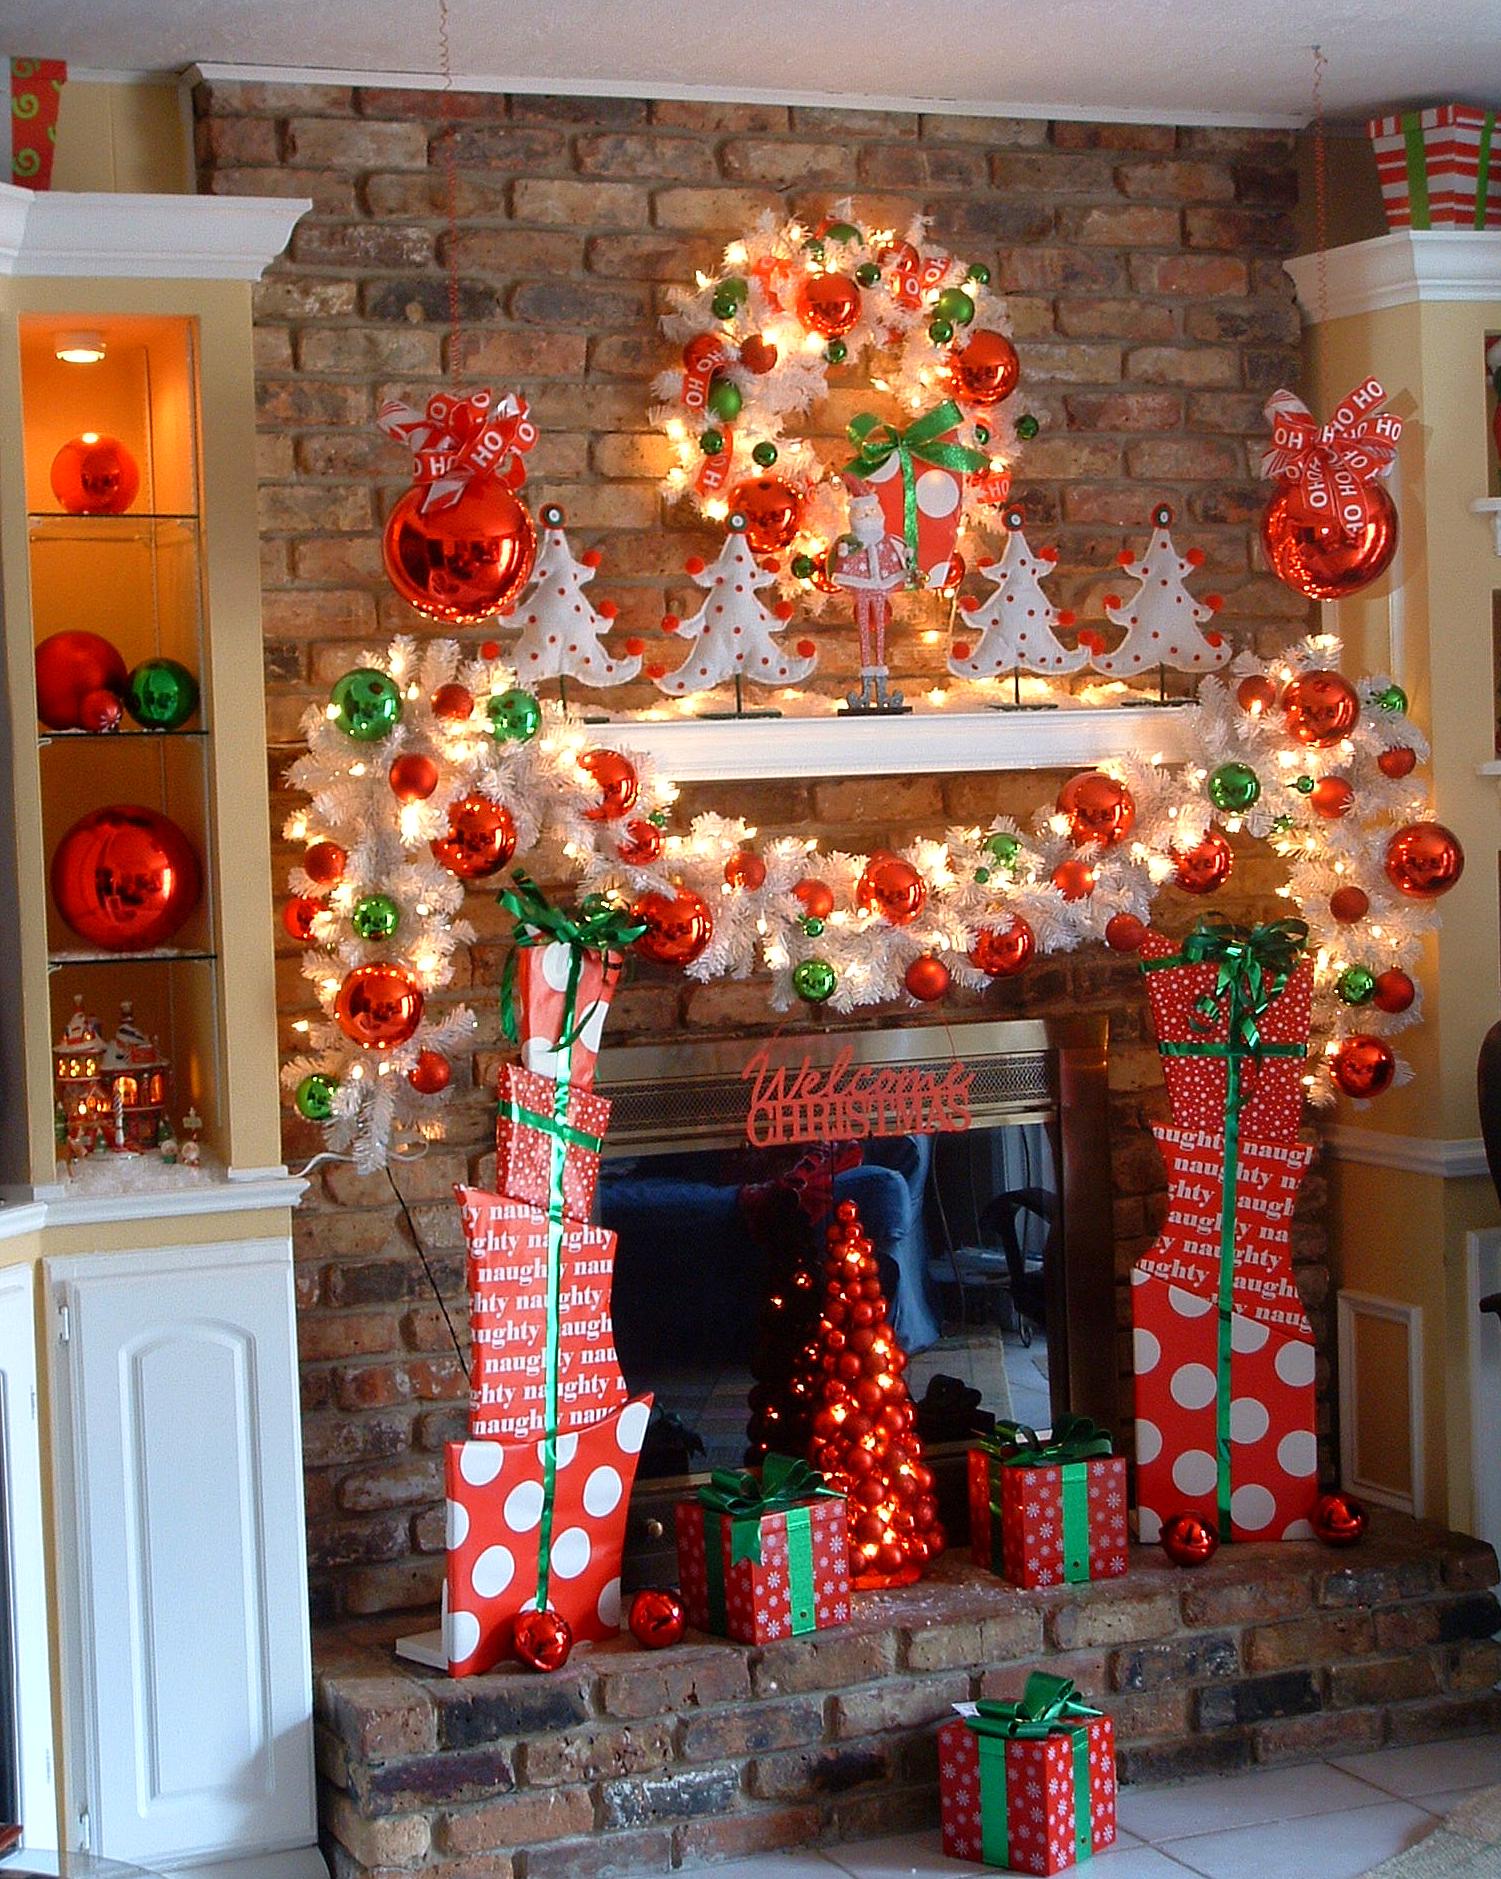 adorable-fireplace-christmas-decorations-presenting-colorful-garland-with-small-christmas-tree-and-cute-wreath-mounted-brick-wall-ideas-fireplace-christmas-decorations-ideas-home-decor-accessori.